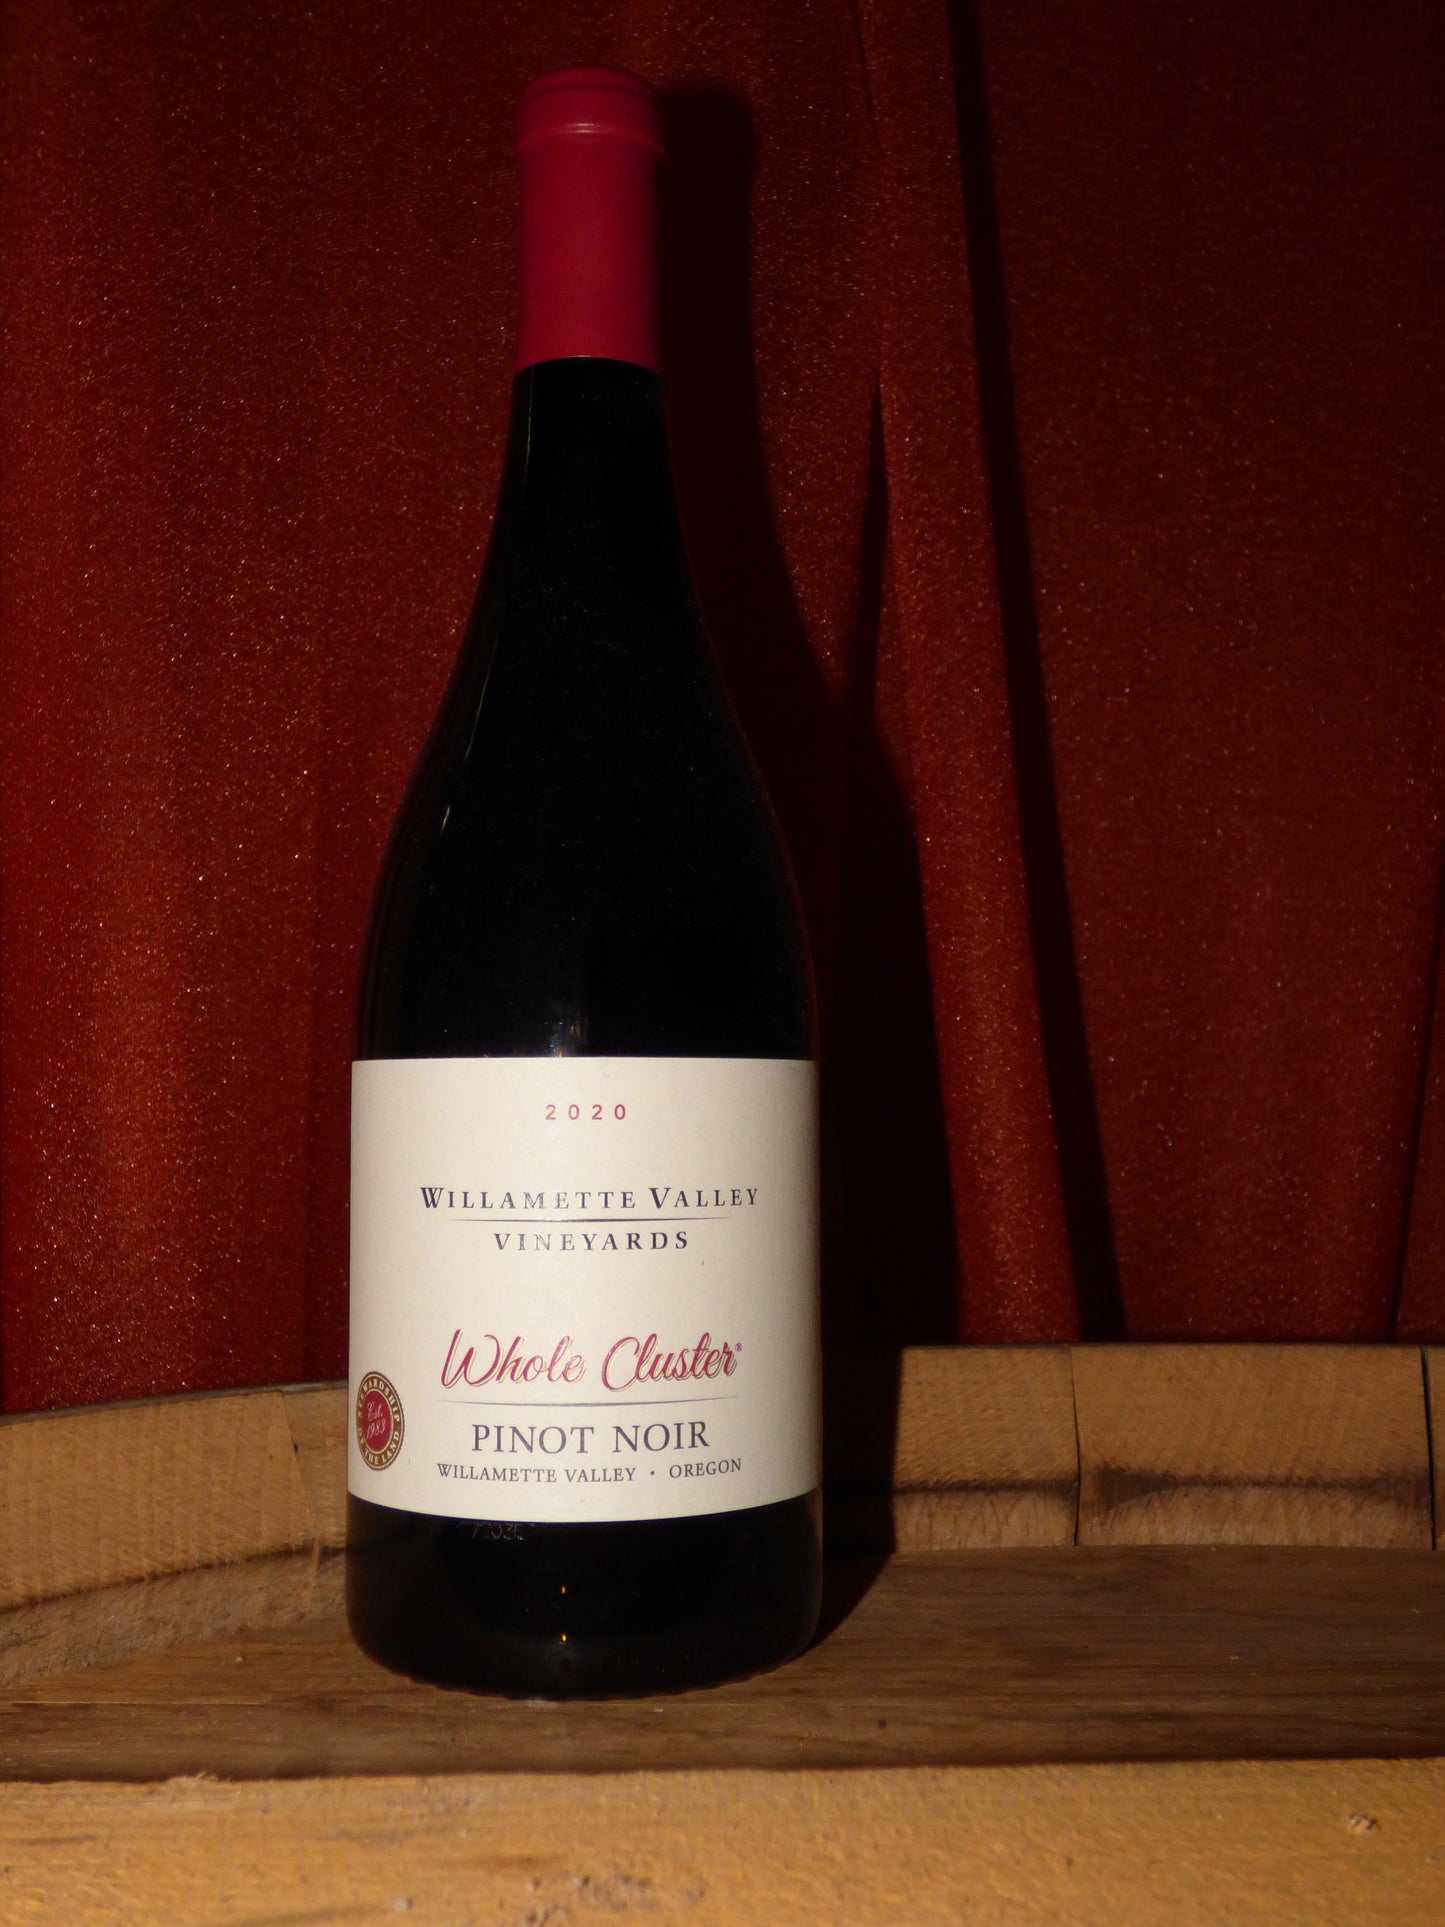 2020 Willamette Valley Whole Cluster Pinot Noir